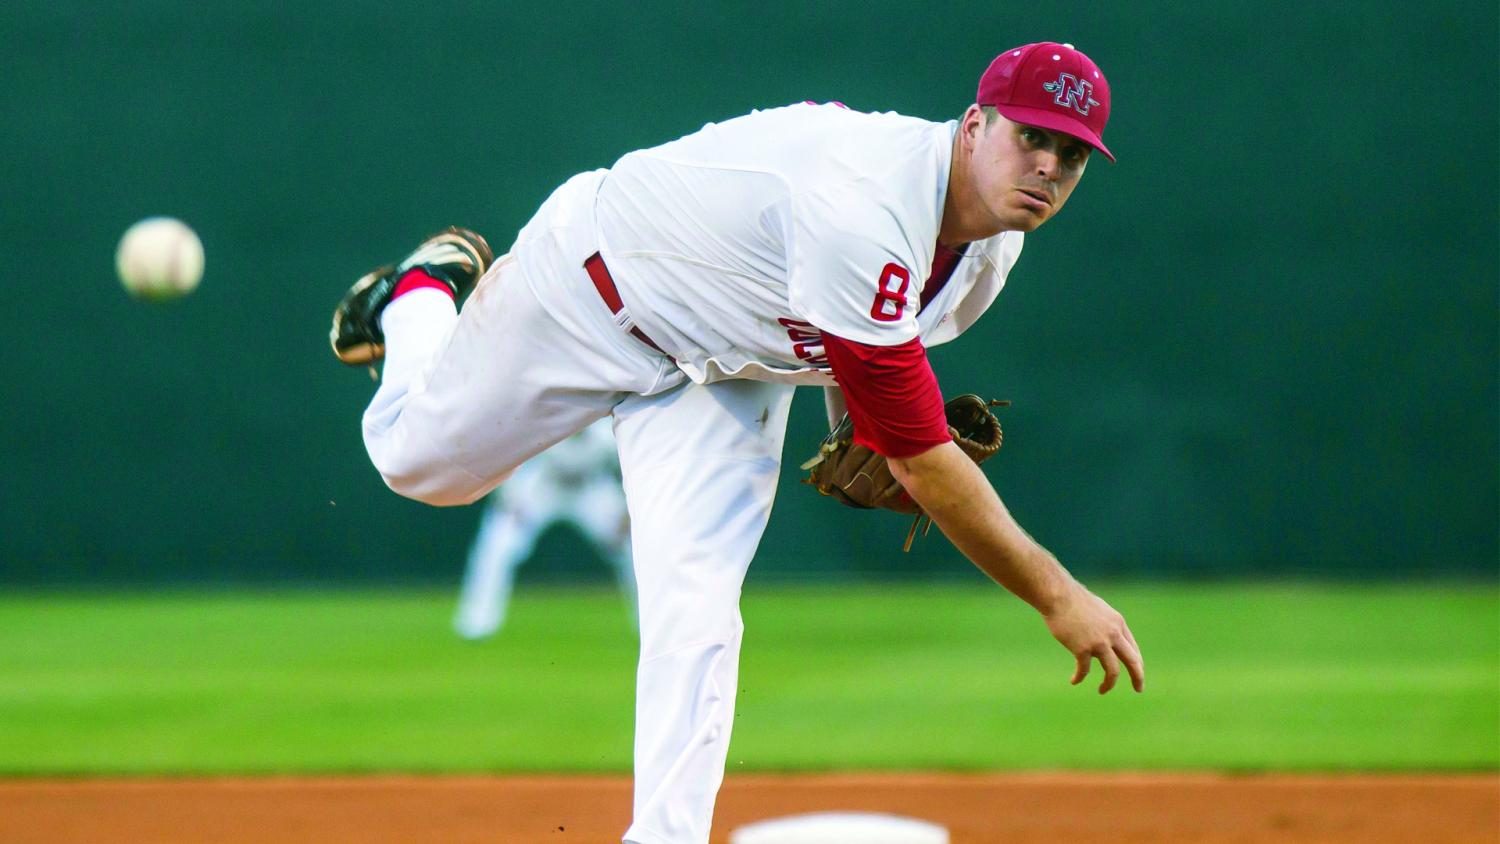 Getting to know former Nicholls pitcher Cole Stapler